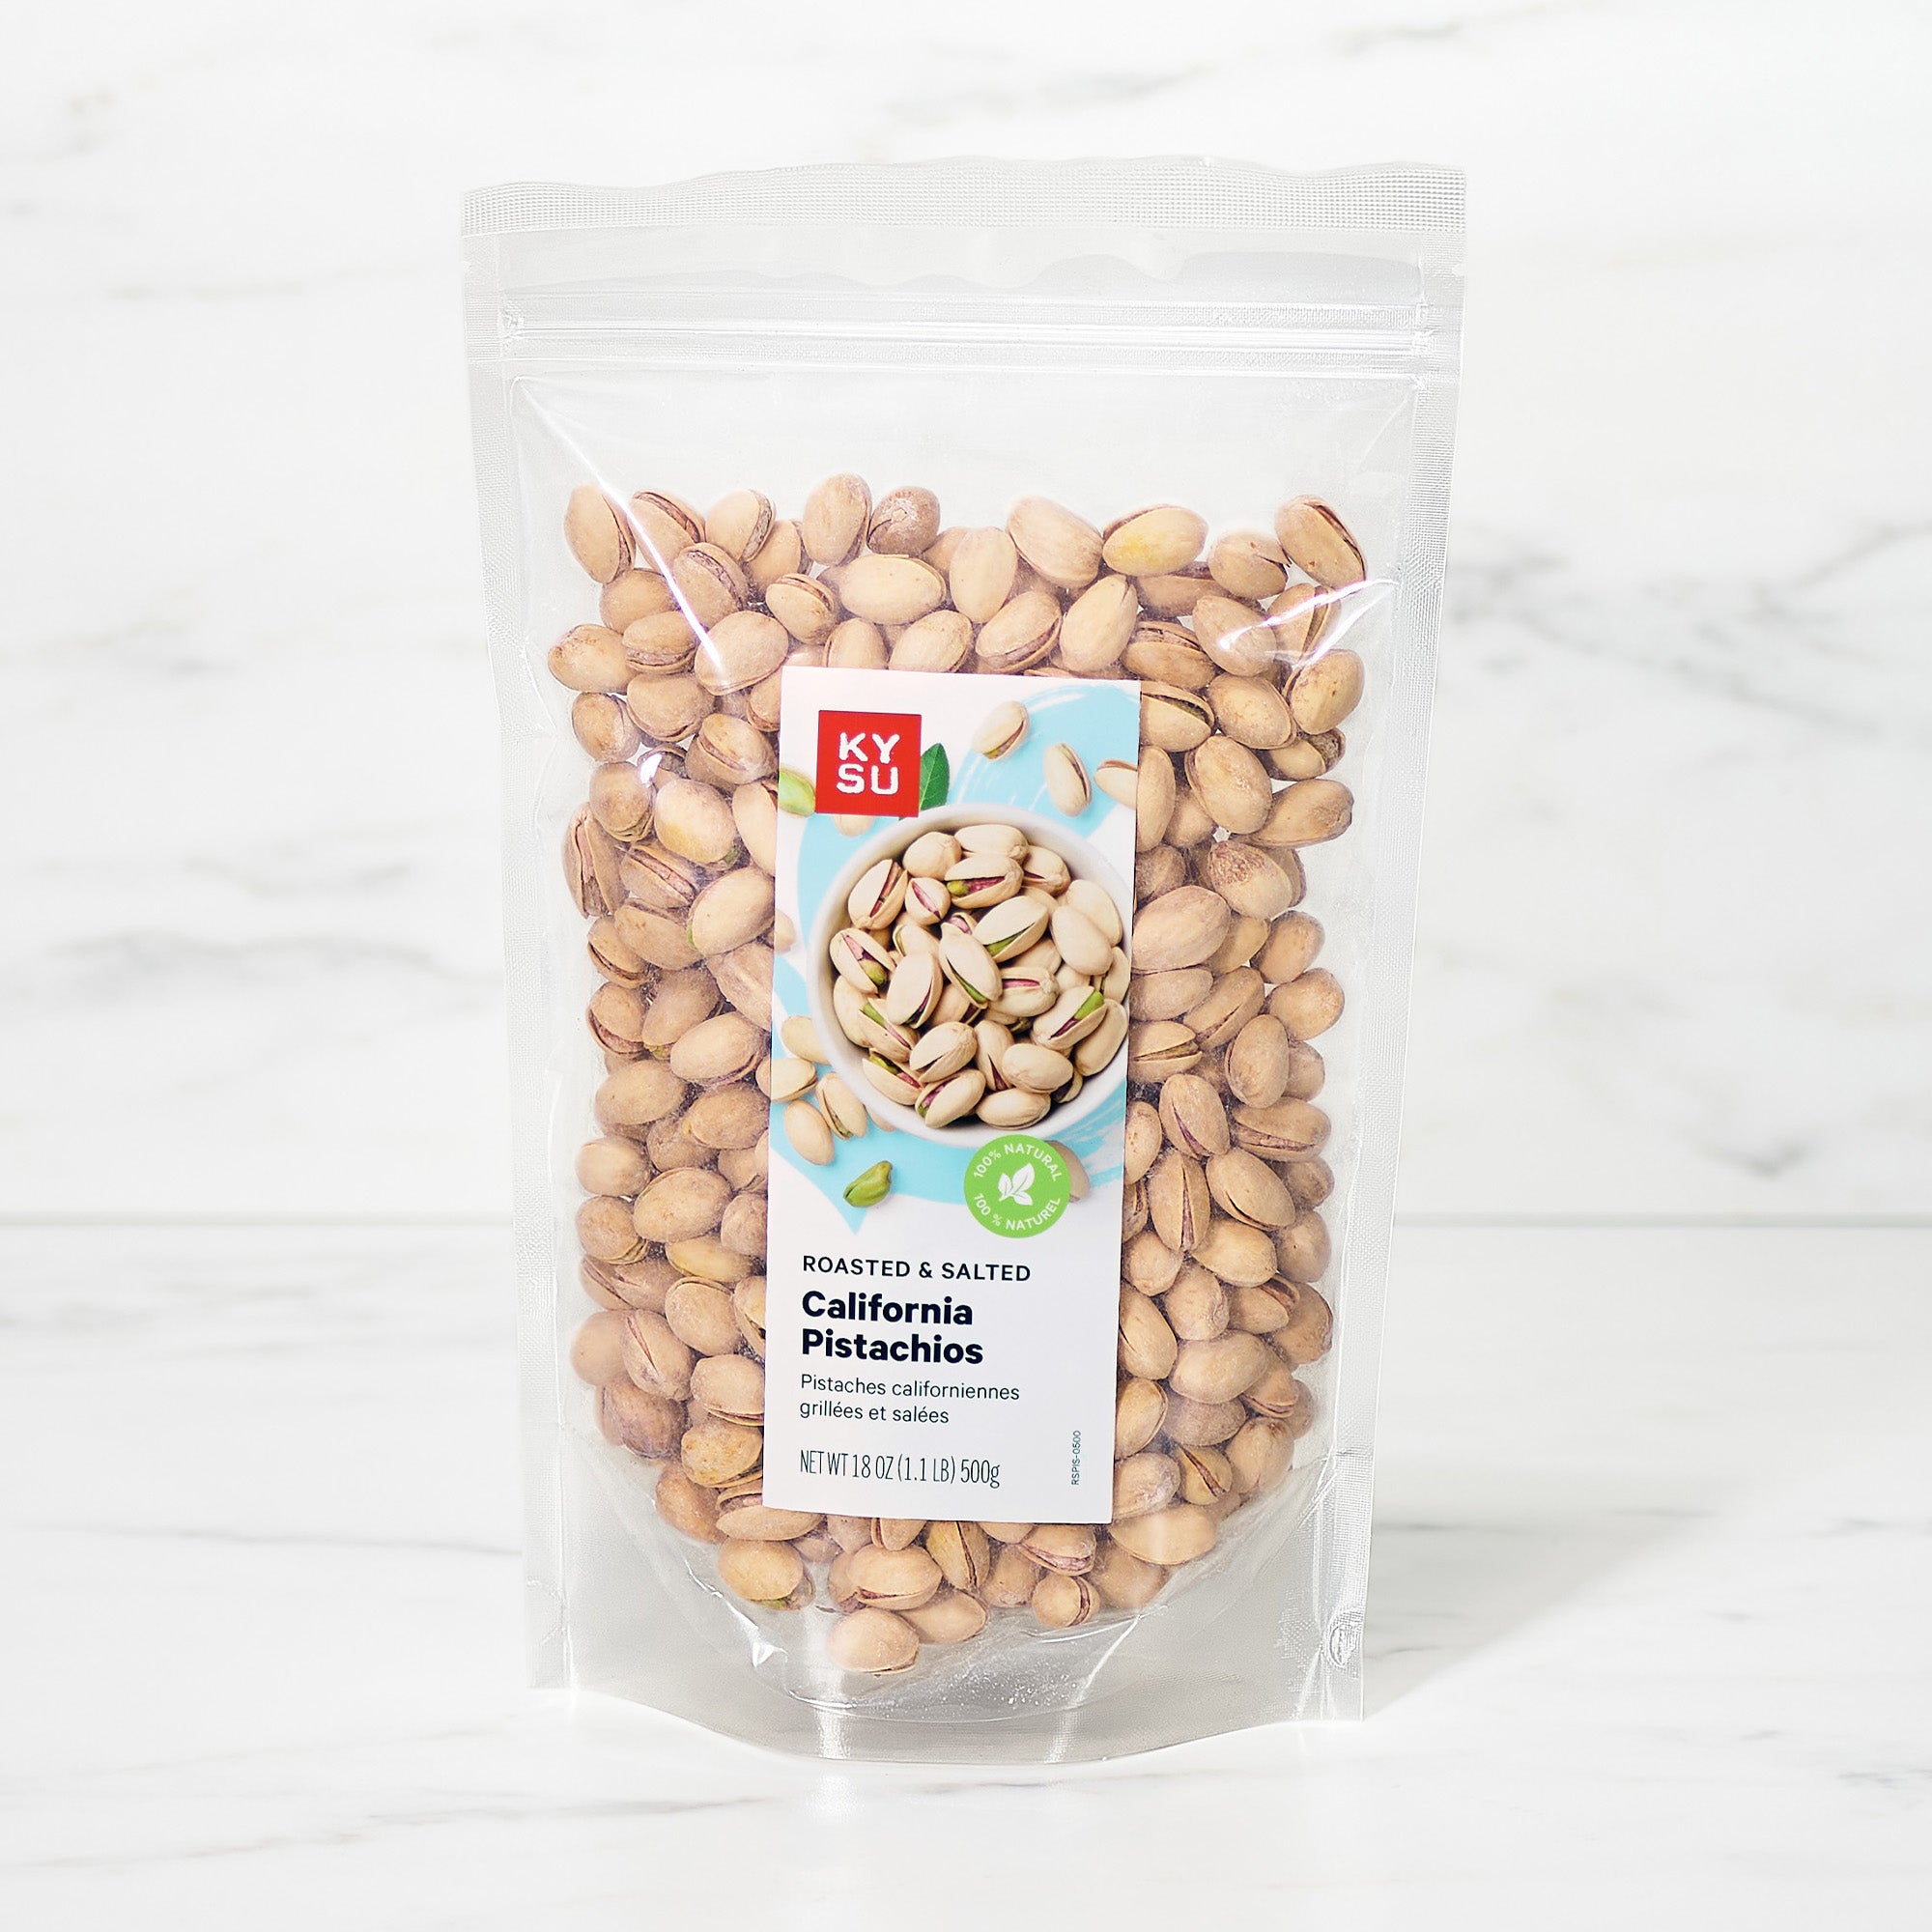 Roasted and salted California pistachios, 500 g